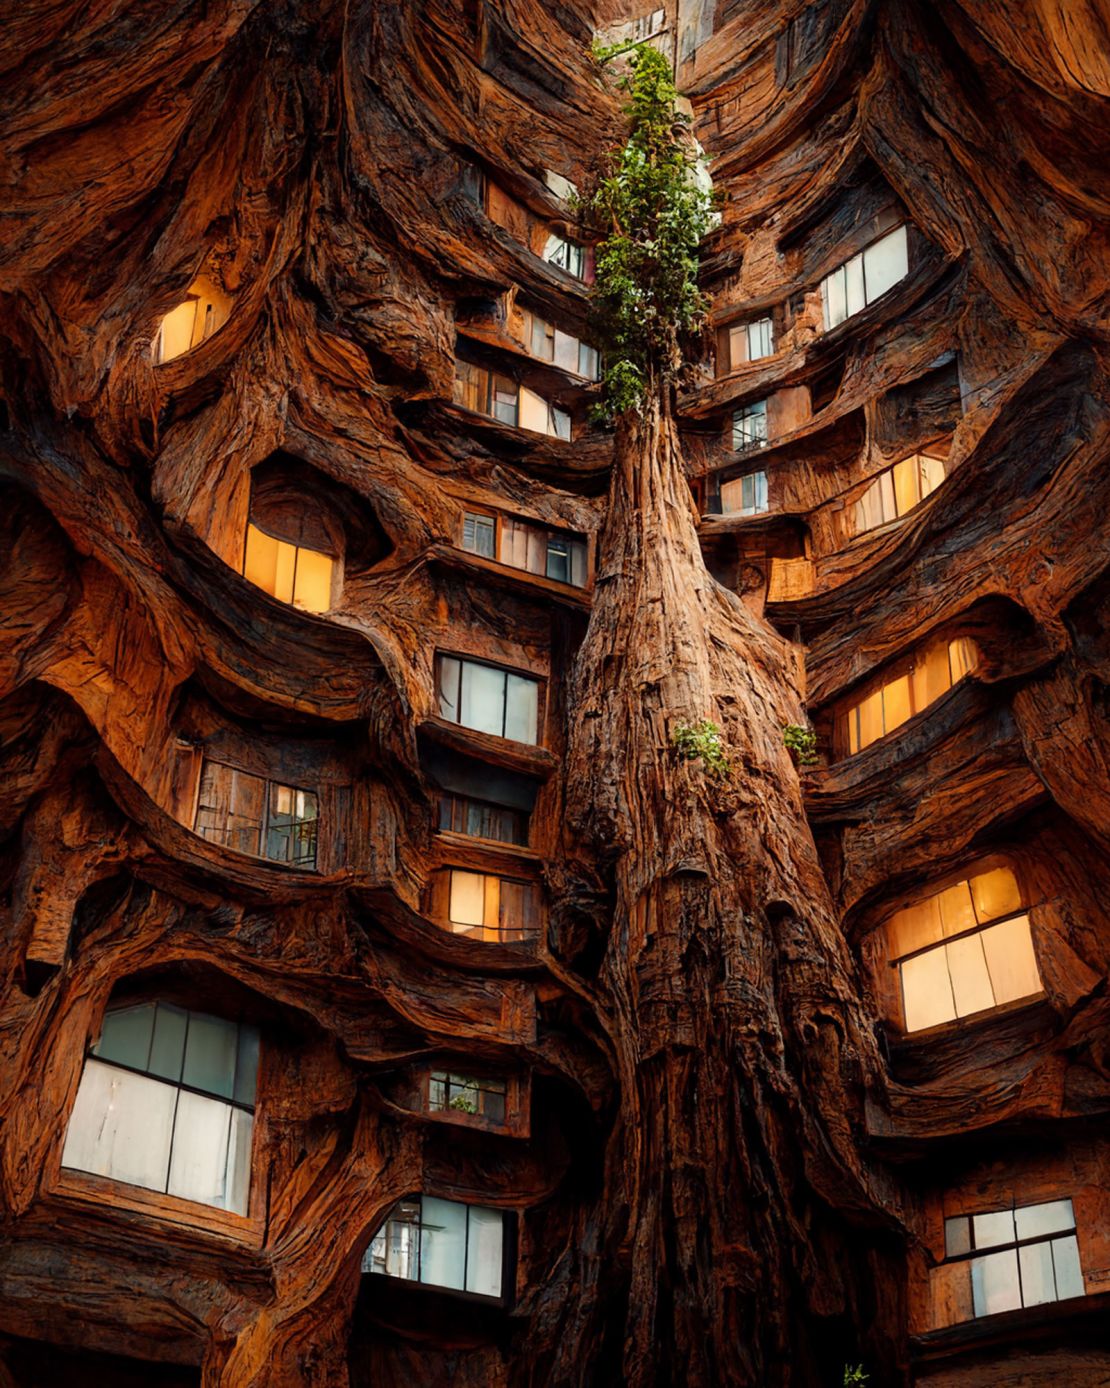 Bhatia's "Symbionic Architecture" project was inspired giant redwood trees.